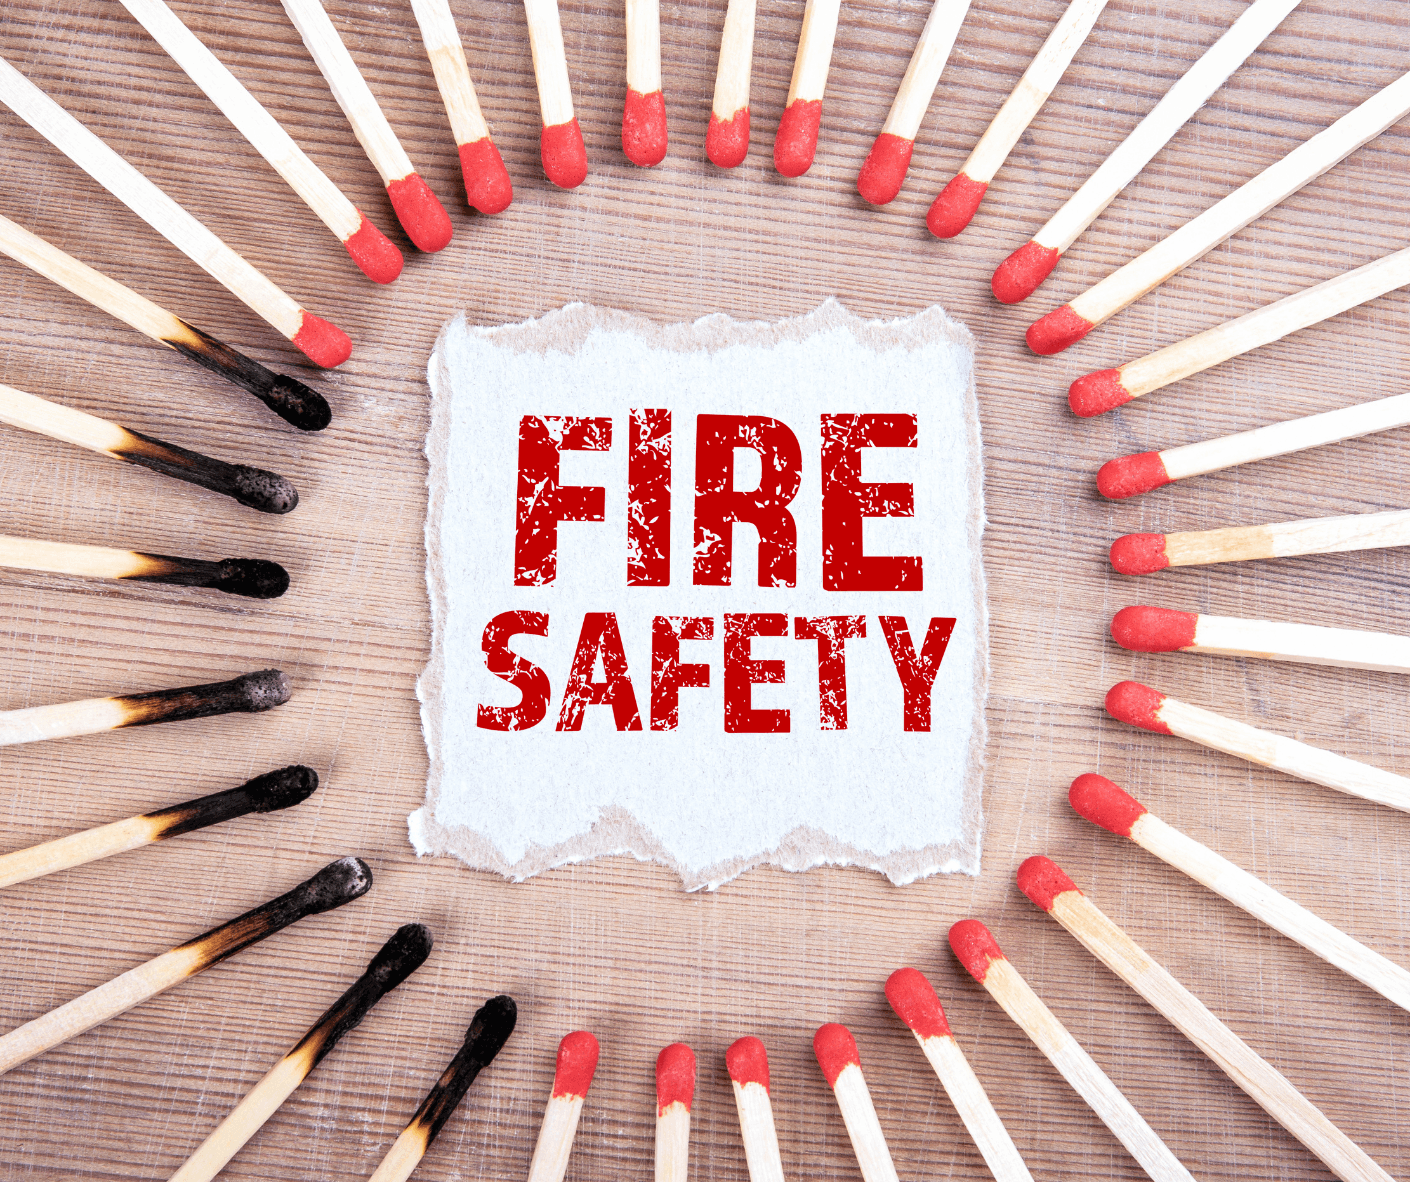 October 4 - Fire Safety